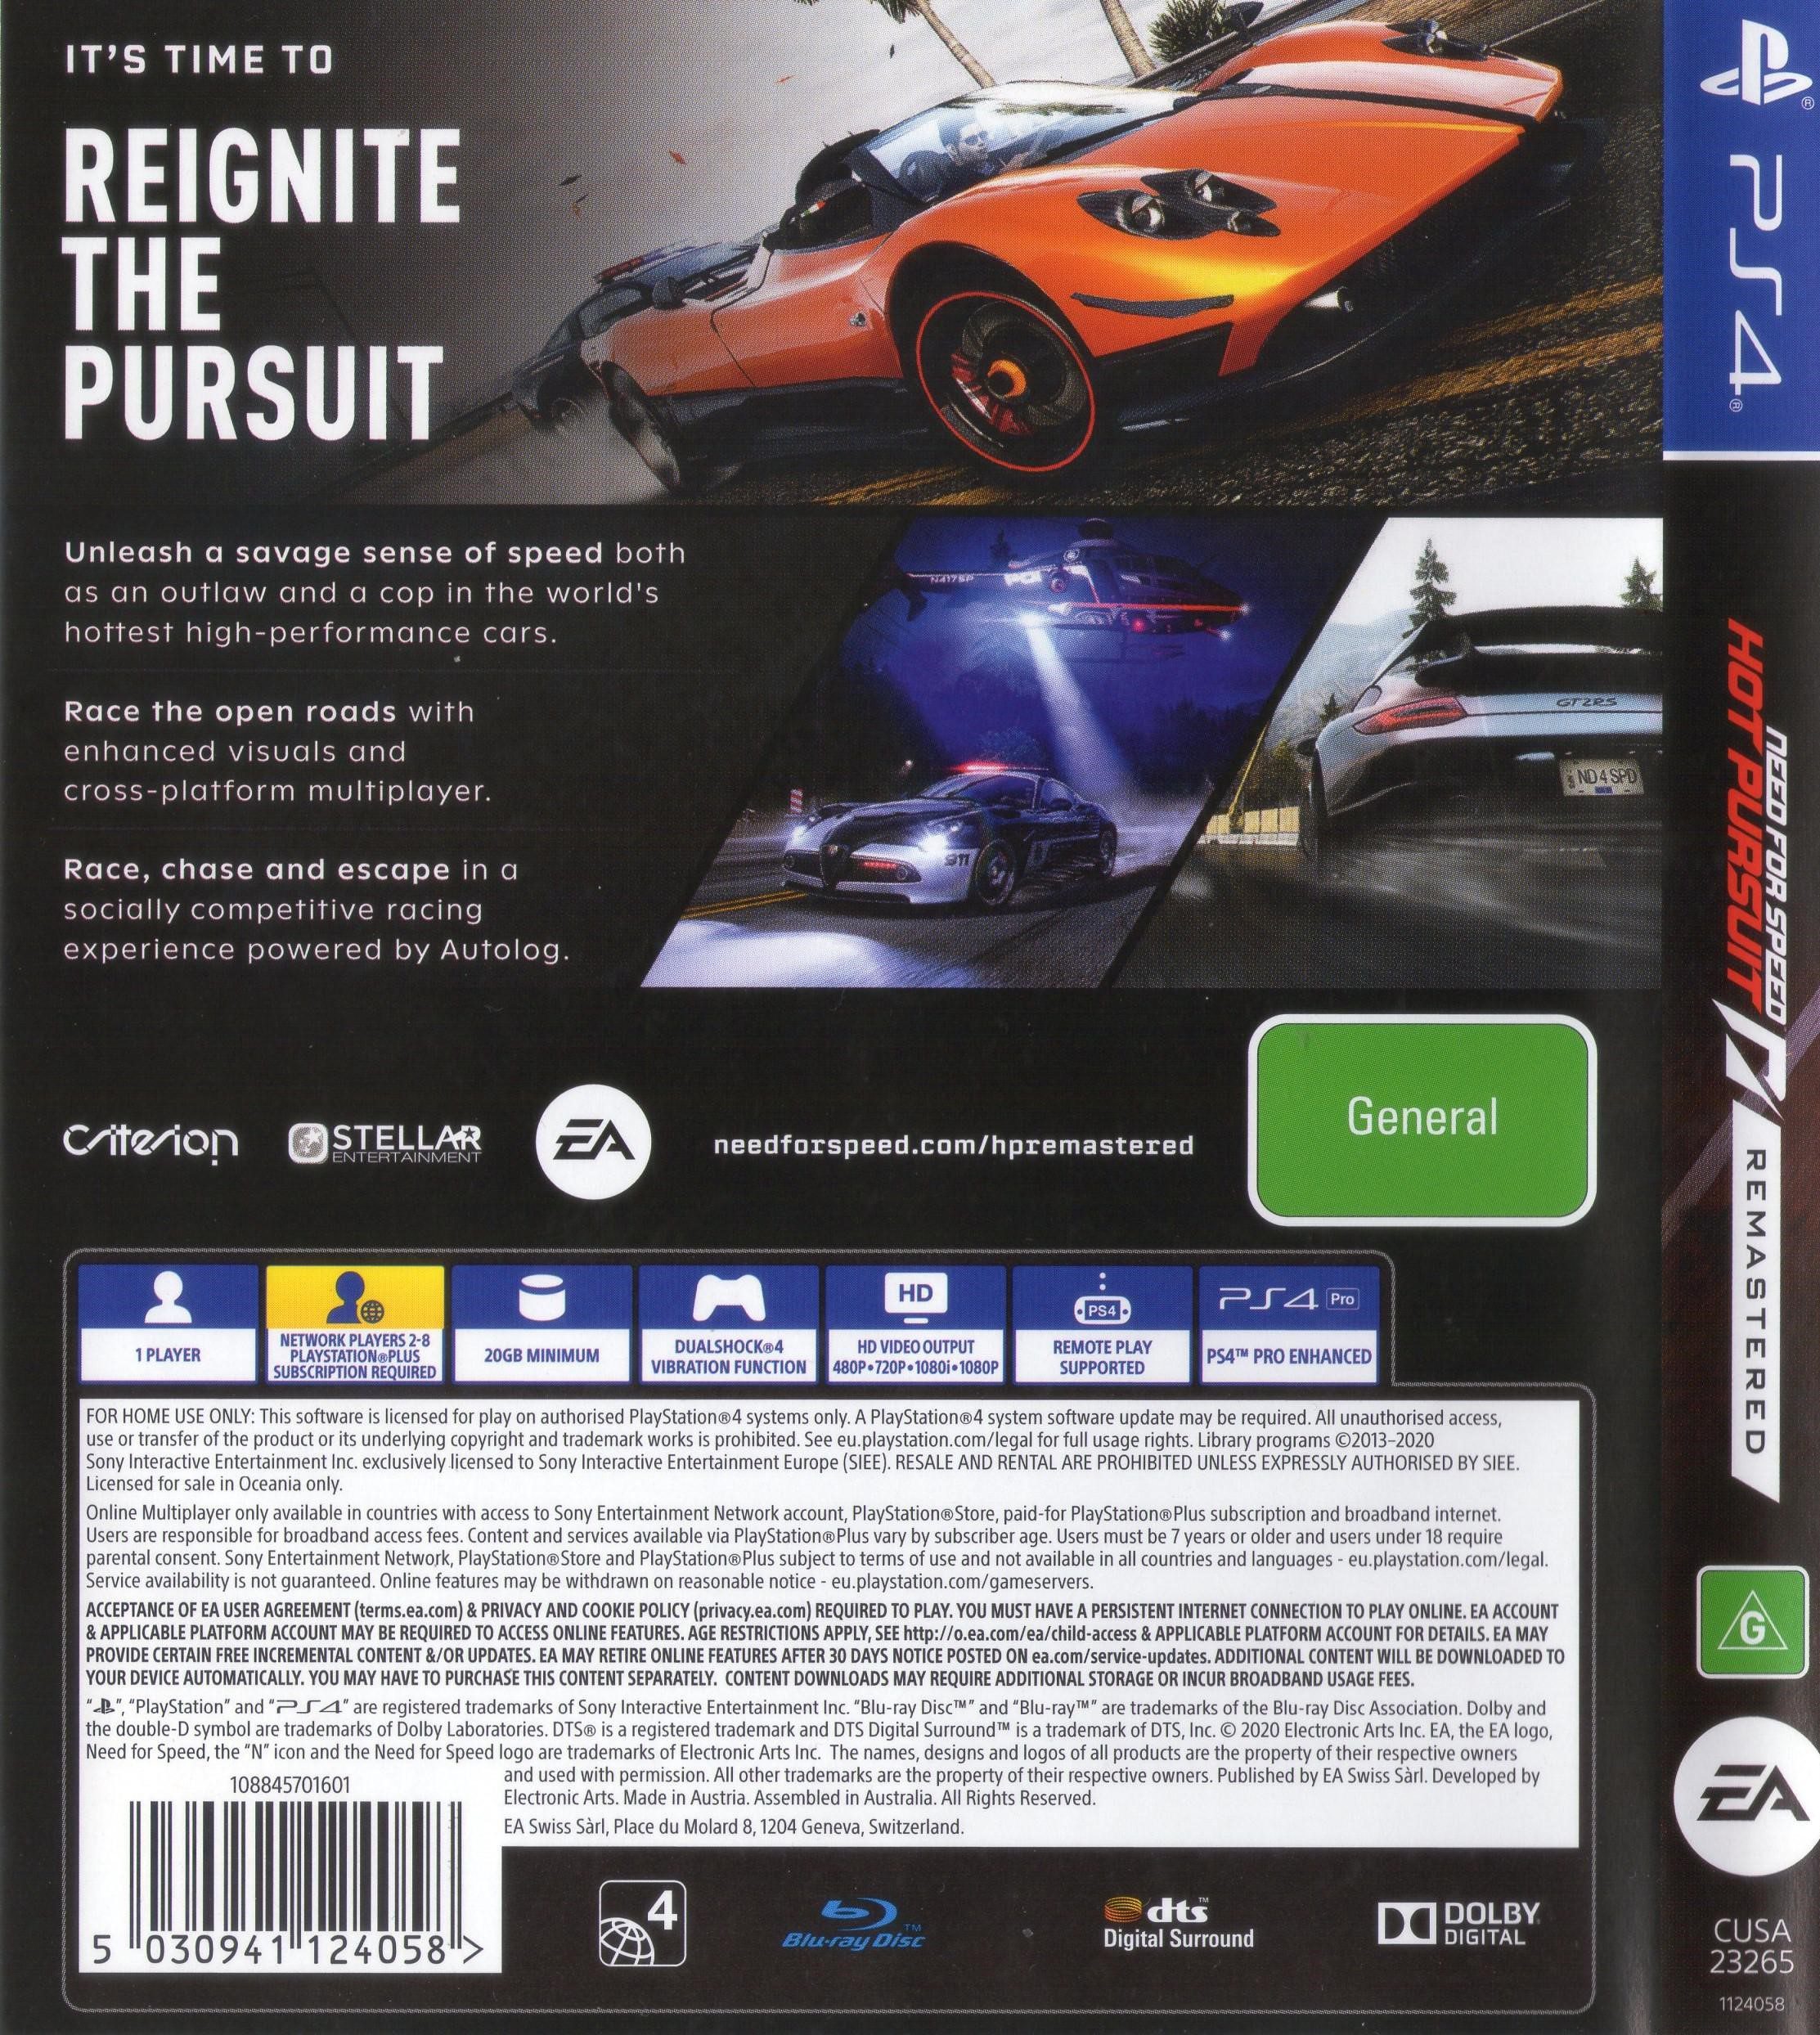 NFS Need for Speed Hot Pursuit Remastered PS4 (New)